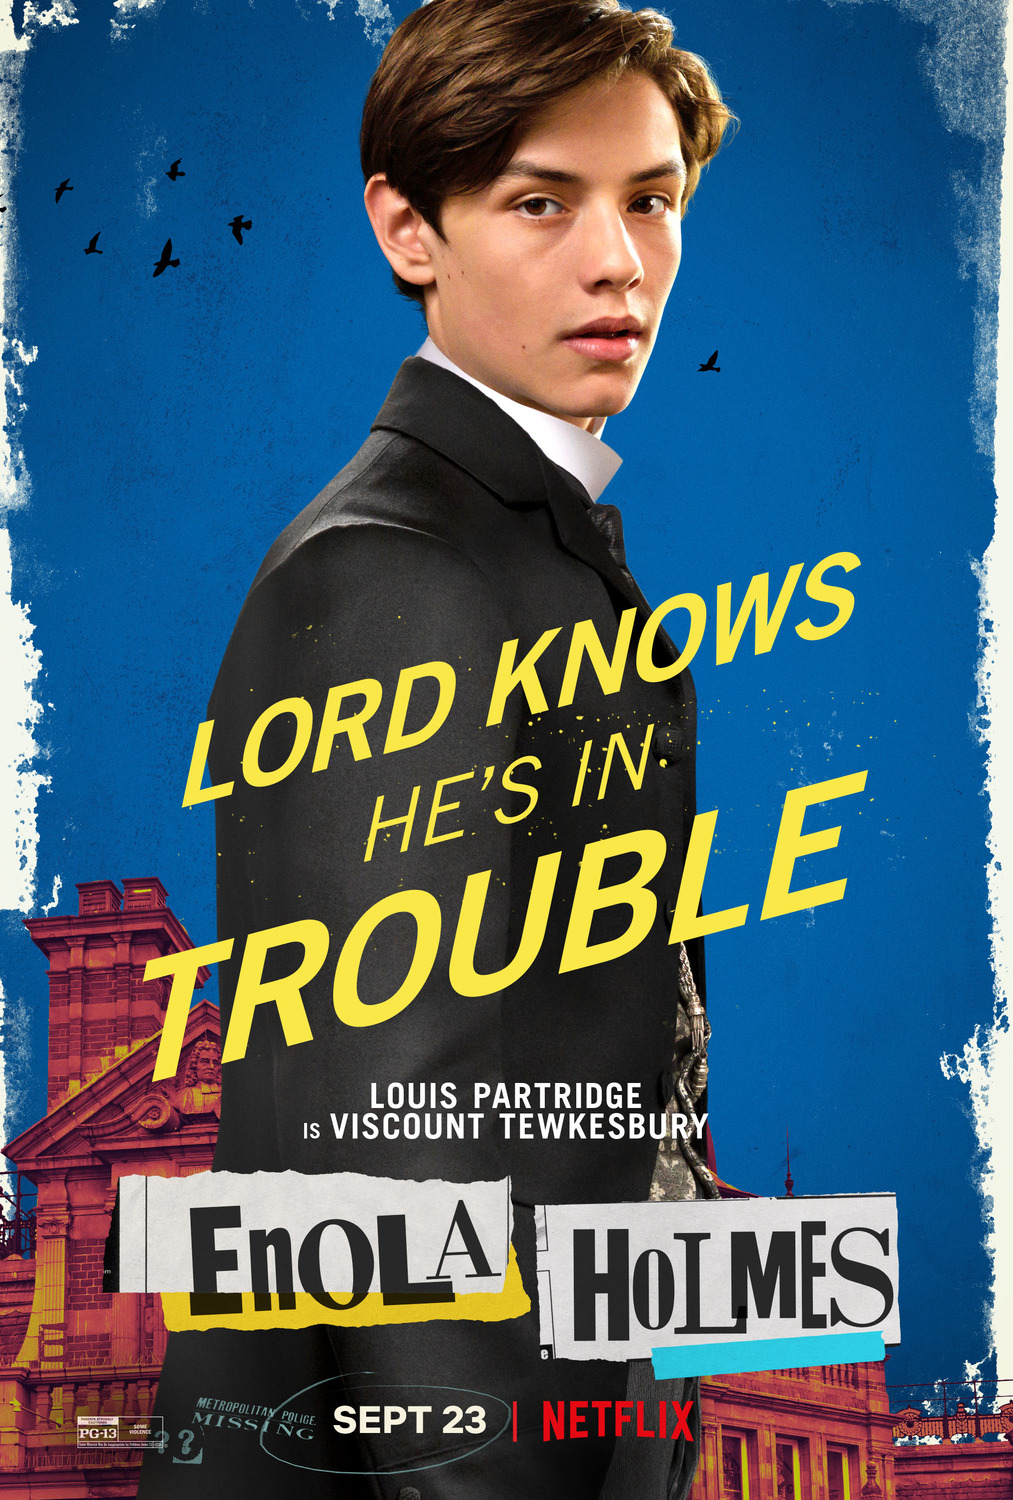 Extra Large TV Poster Image for Enola Holmes (#9 of 9)